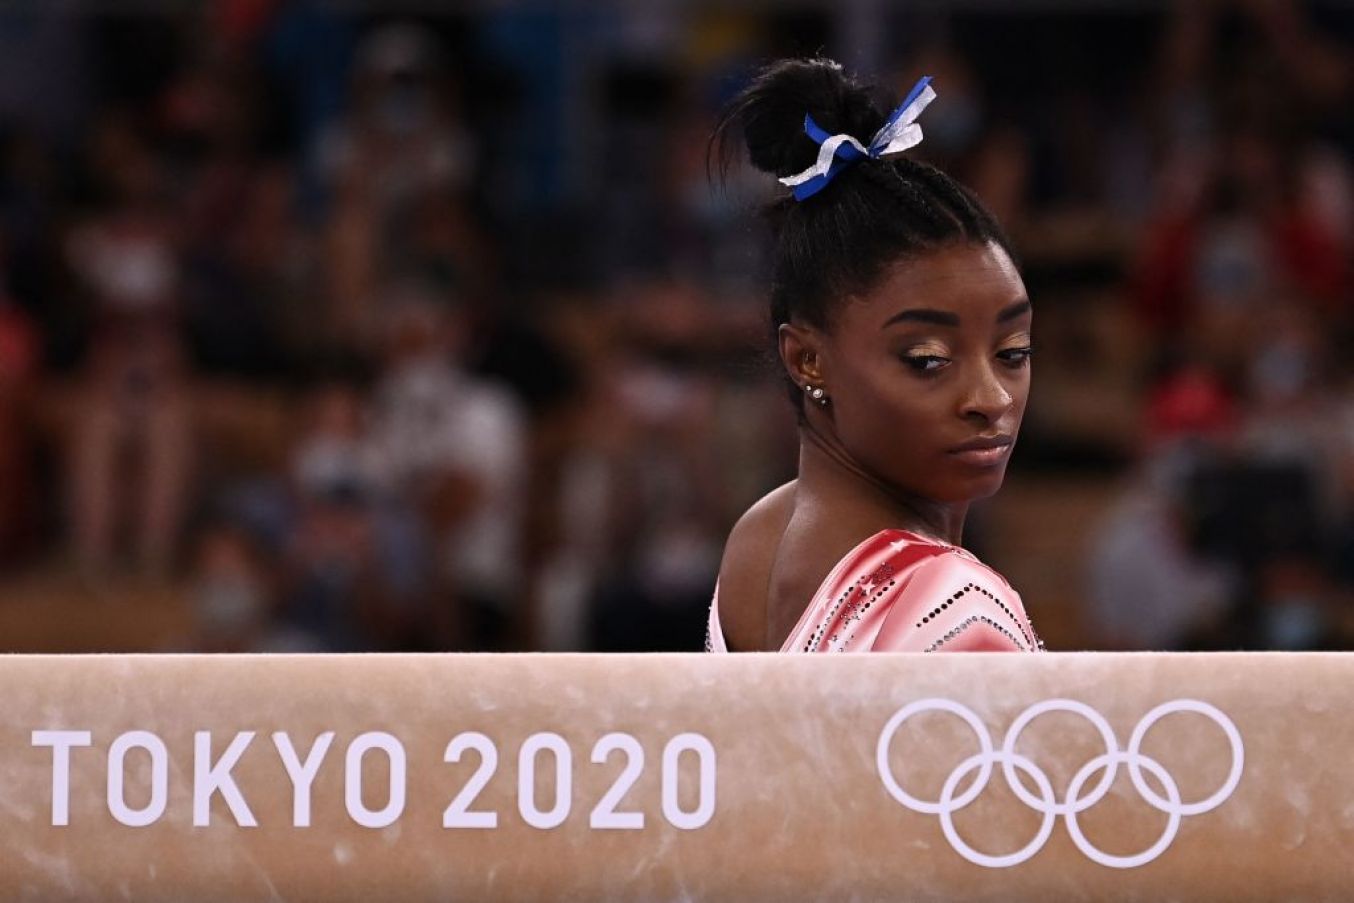 Usa's Simone Biles Gets Ready To Compete In The Artistic Gymnastics Women's Balance Beam Final Of The Tokyo 2020 Olympic Games. Photo: Lionel Bonaventure/Afp Via Getty Images